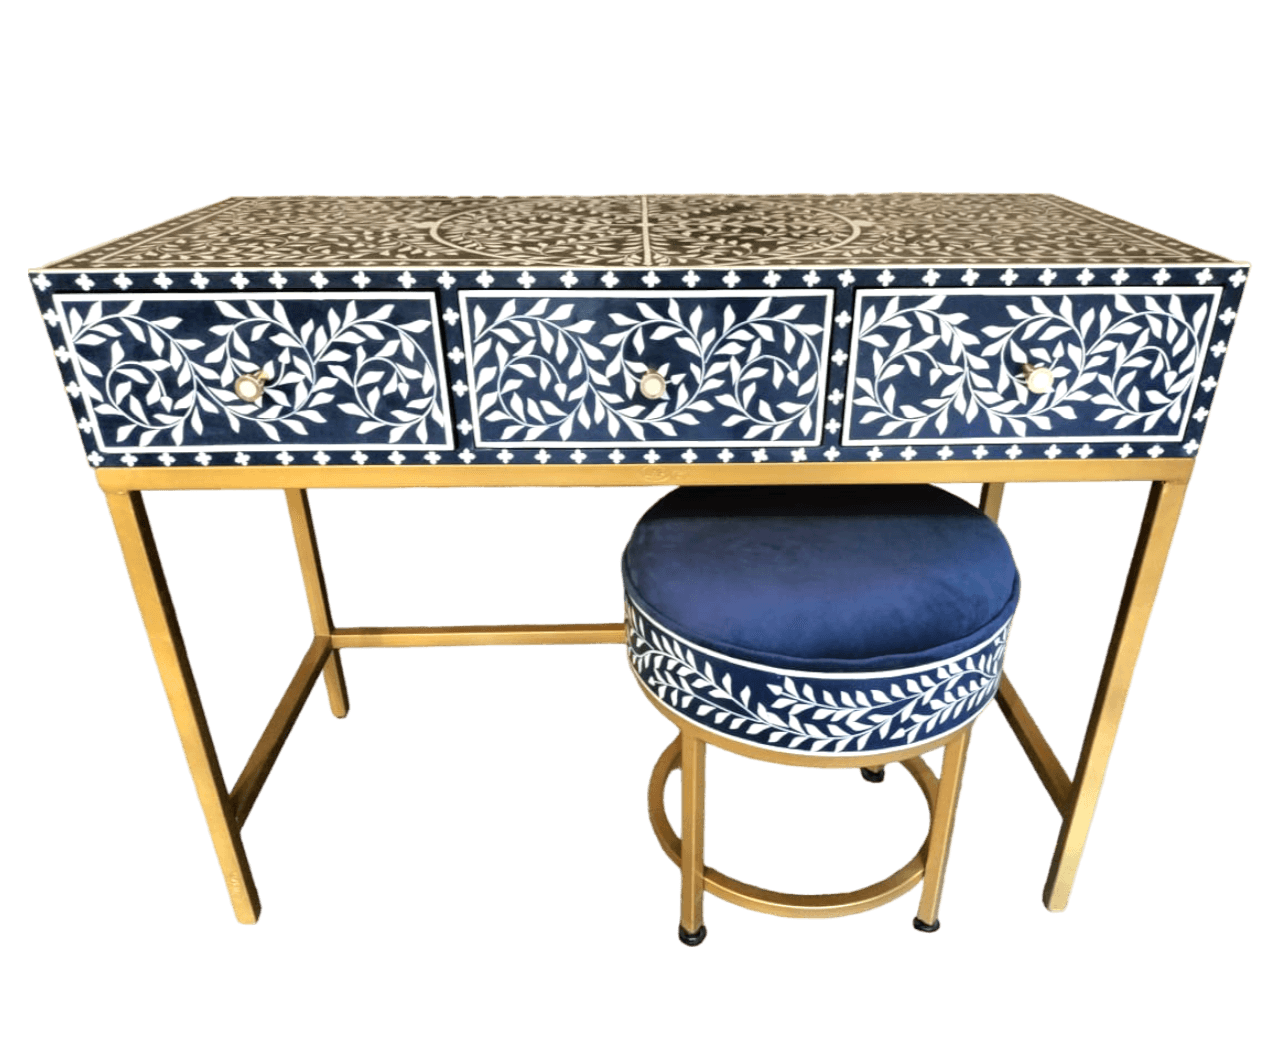 Floral Bone Inlay Vanity Console and Stool Set - MAIA HOMES